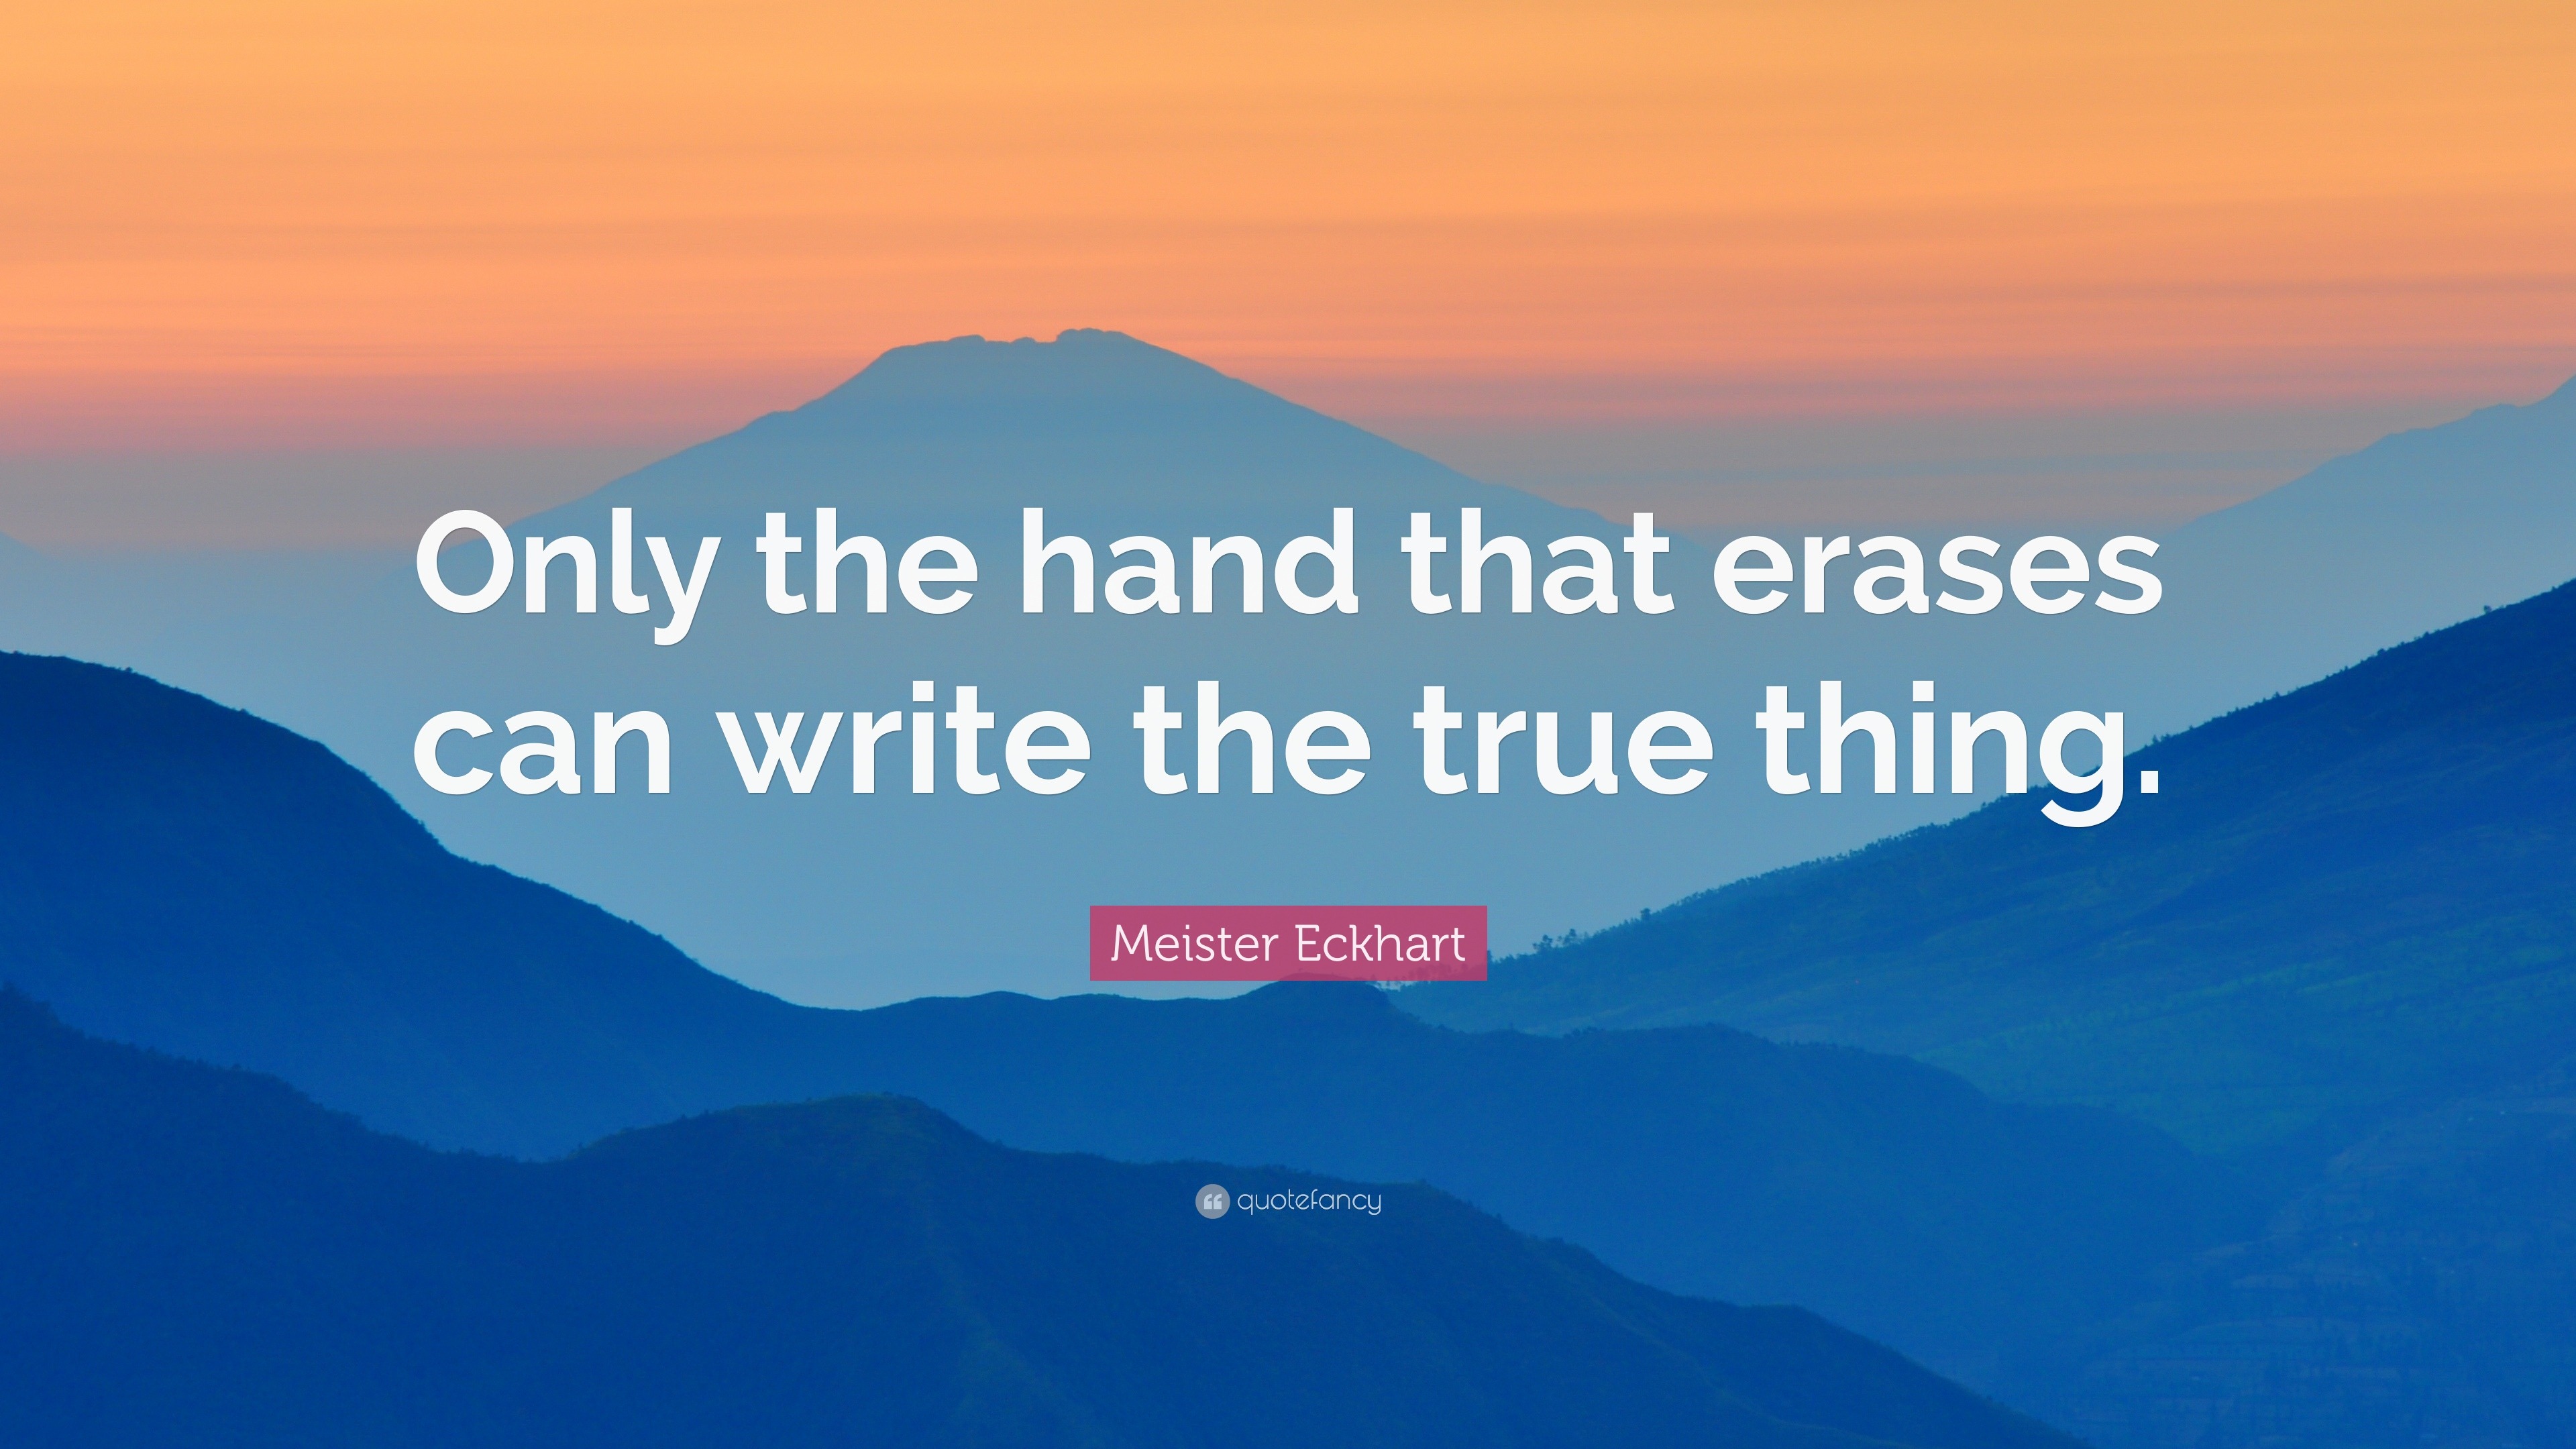 Meister Eckhart Quote: “Only the hand that erases can write the true ...